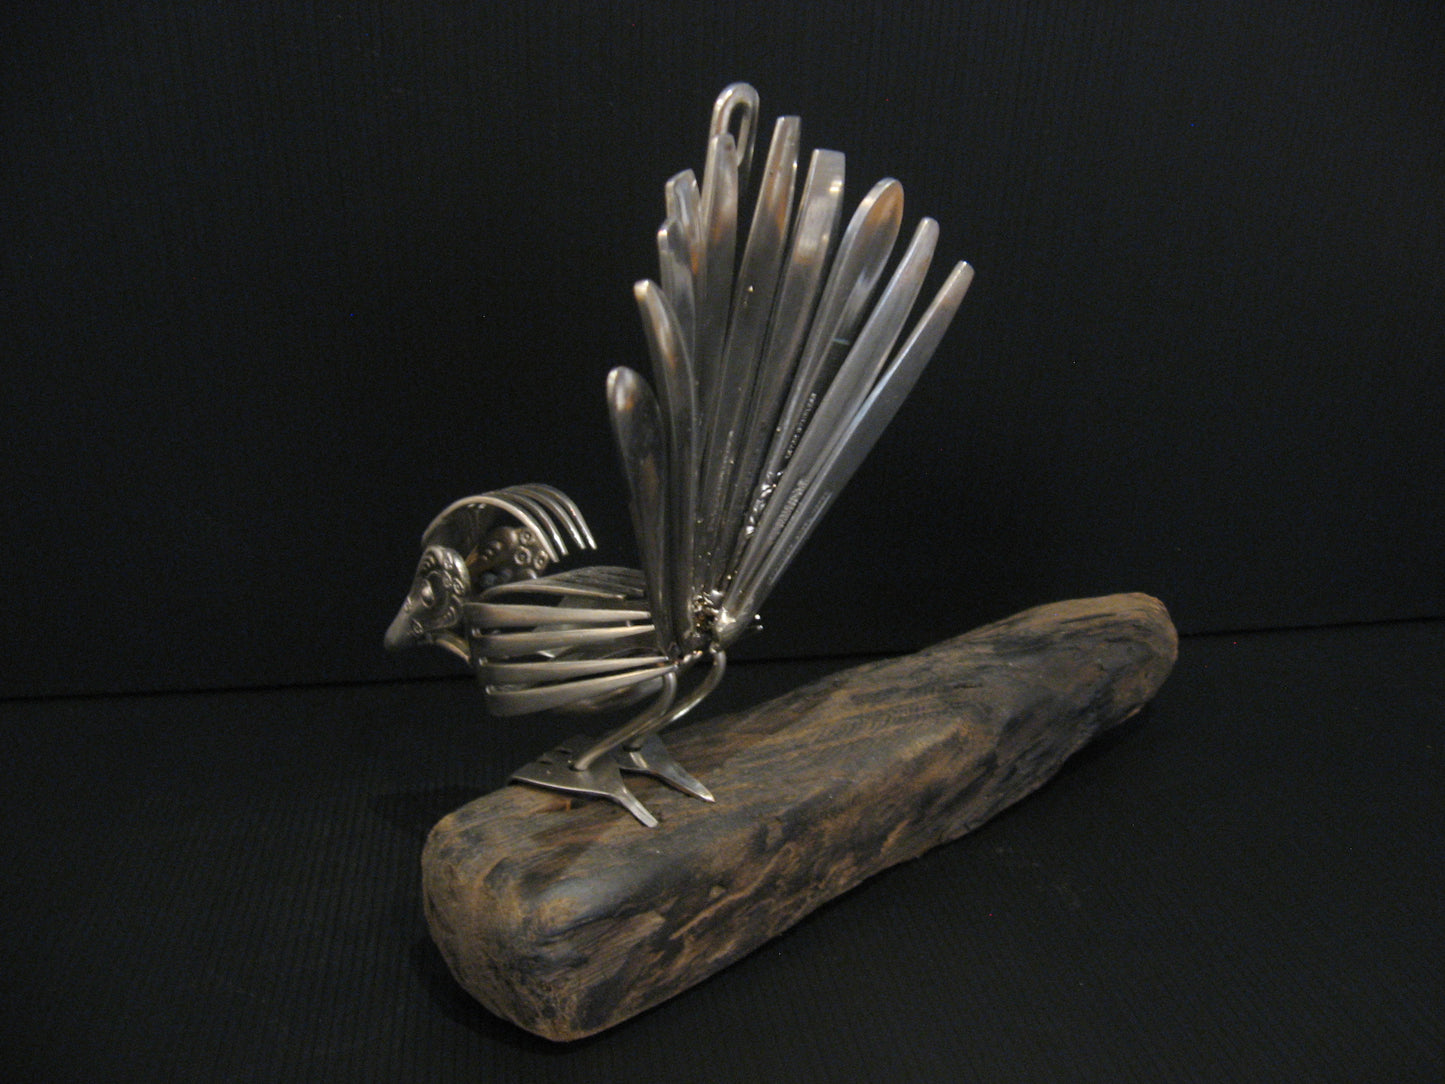 Sculpture from Cutlery Piwakawaka (Fantail) by Nathan Hull Silver Fern Gallery